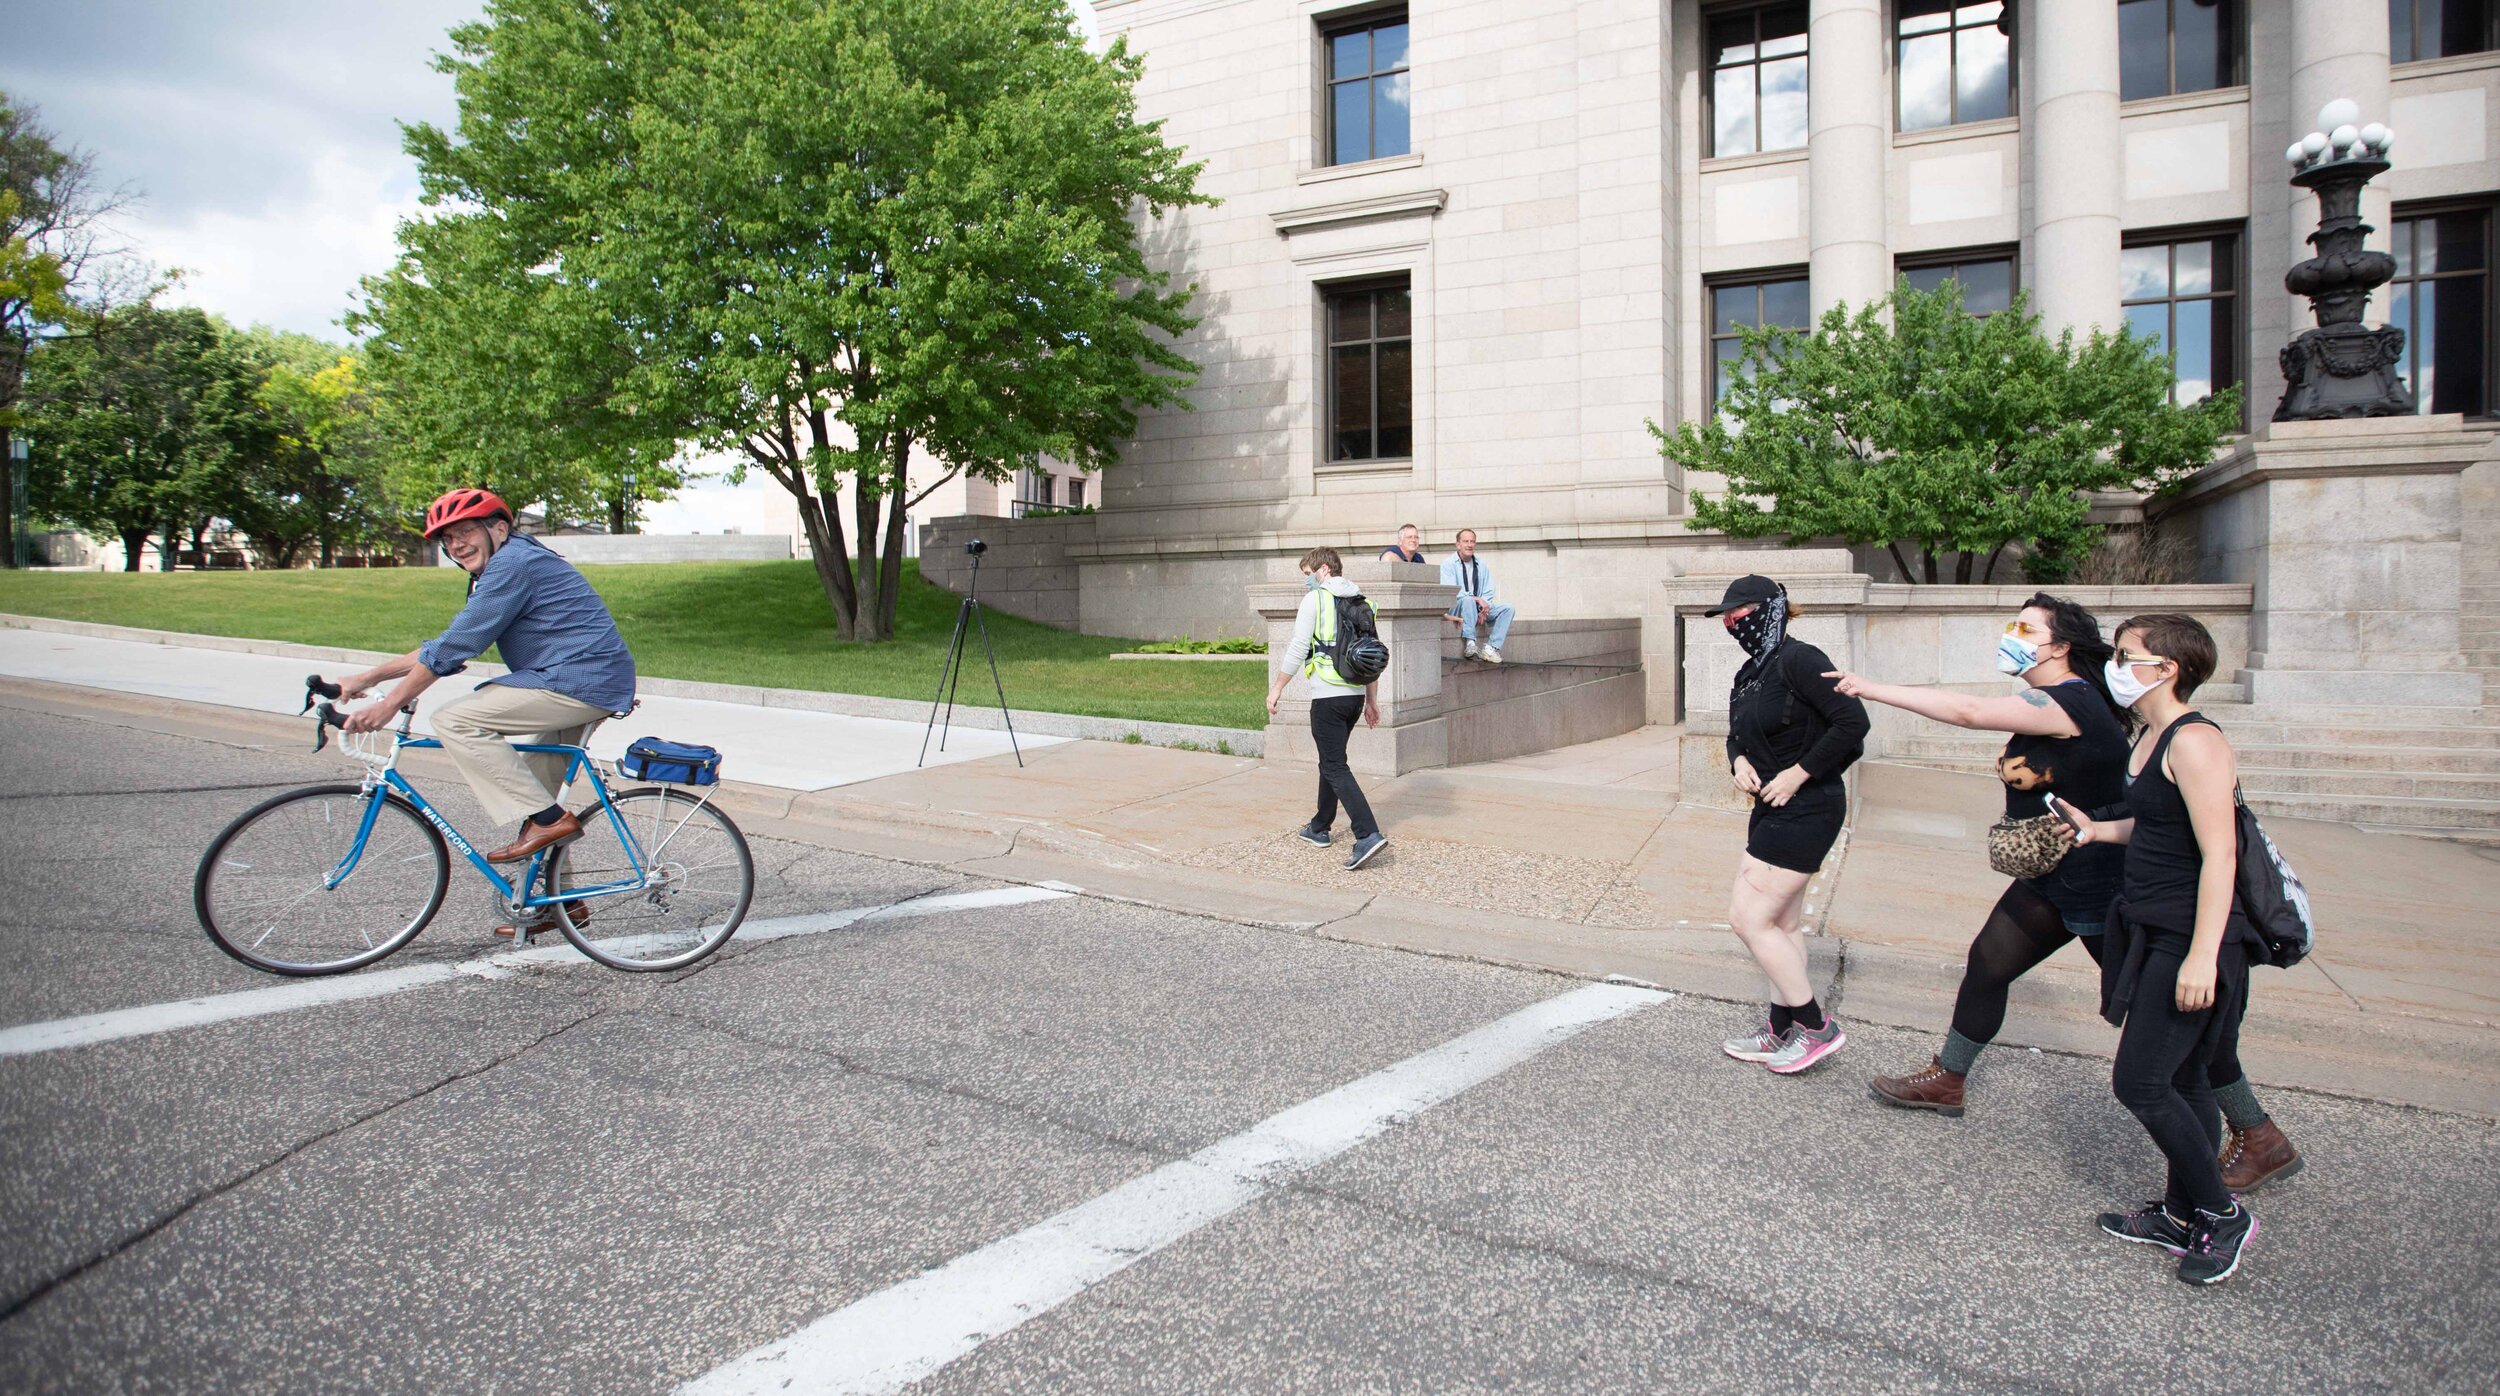  After telling activists, "they can't do whatever they want," a man on a bike gets screamed at as he rode by the torn down statue of Christopher Columbus on the State Capitol grounds in Saint Paul, Minnesota on Jun 10, 2020. 